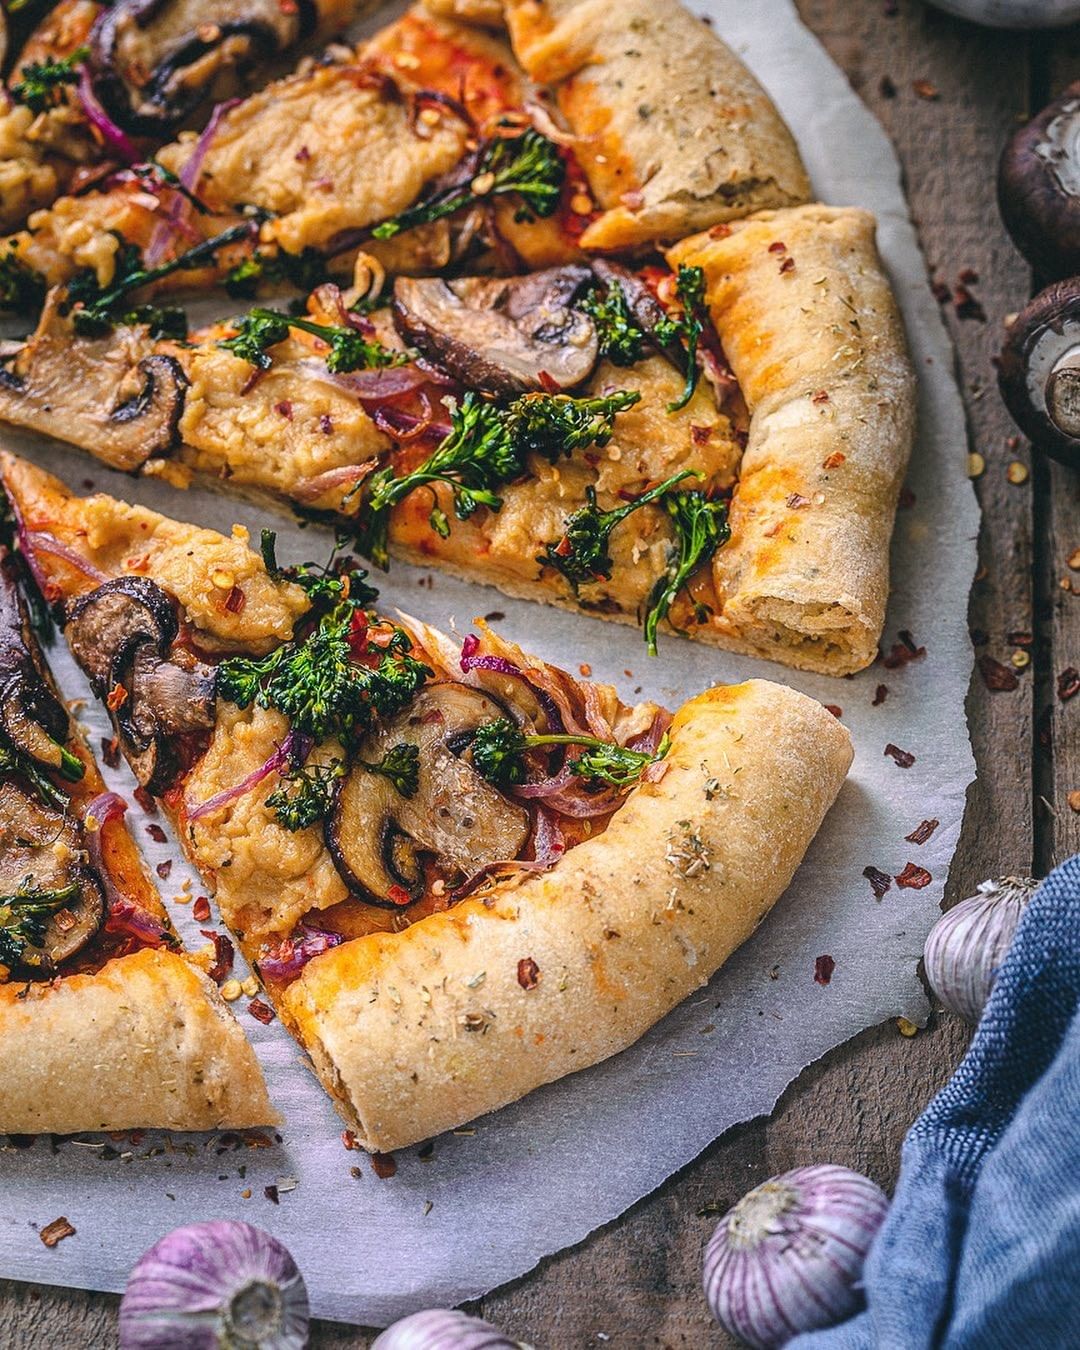 Stuffed Crust Pizza Made with Homemade Dairy-Free Mozzarella Cheese